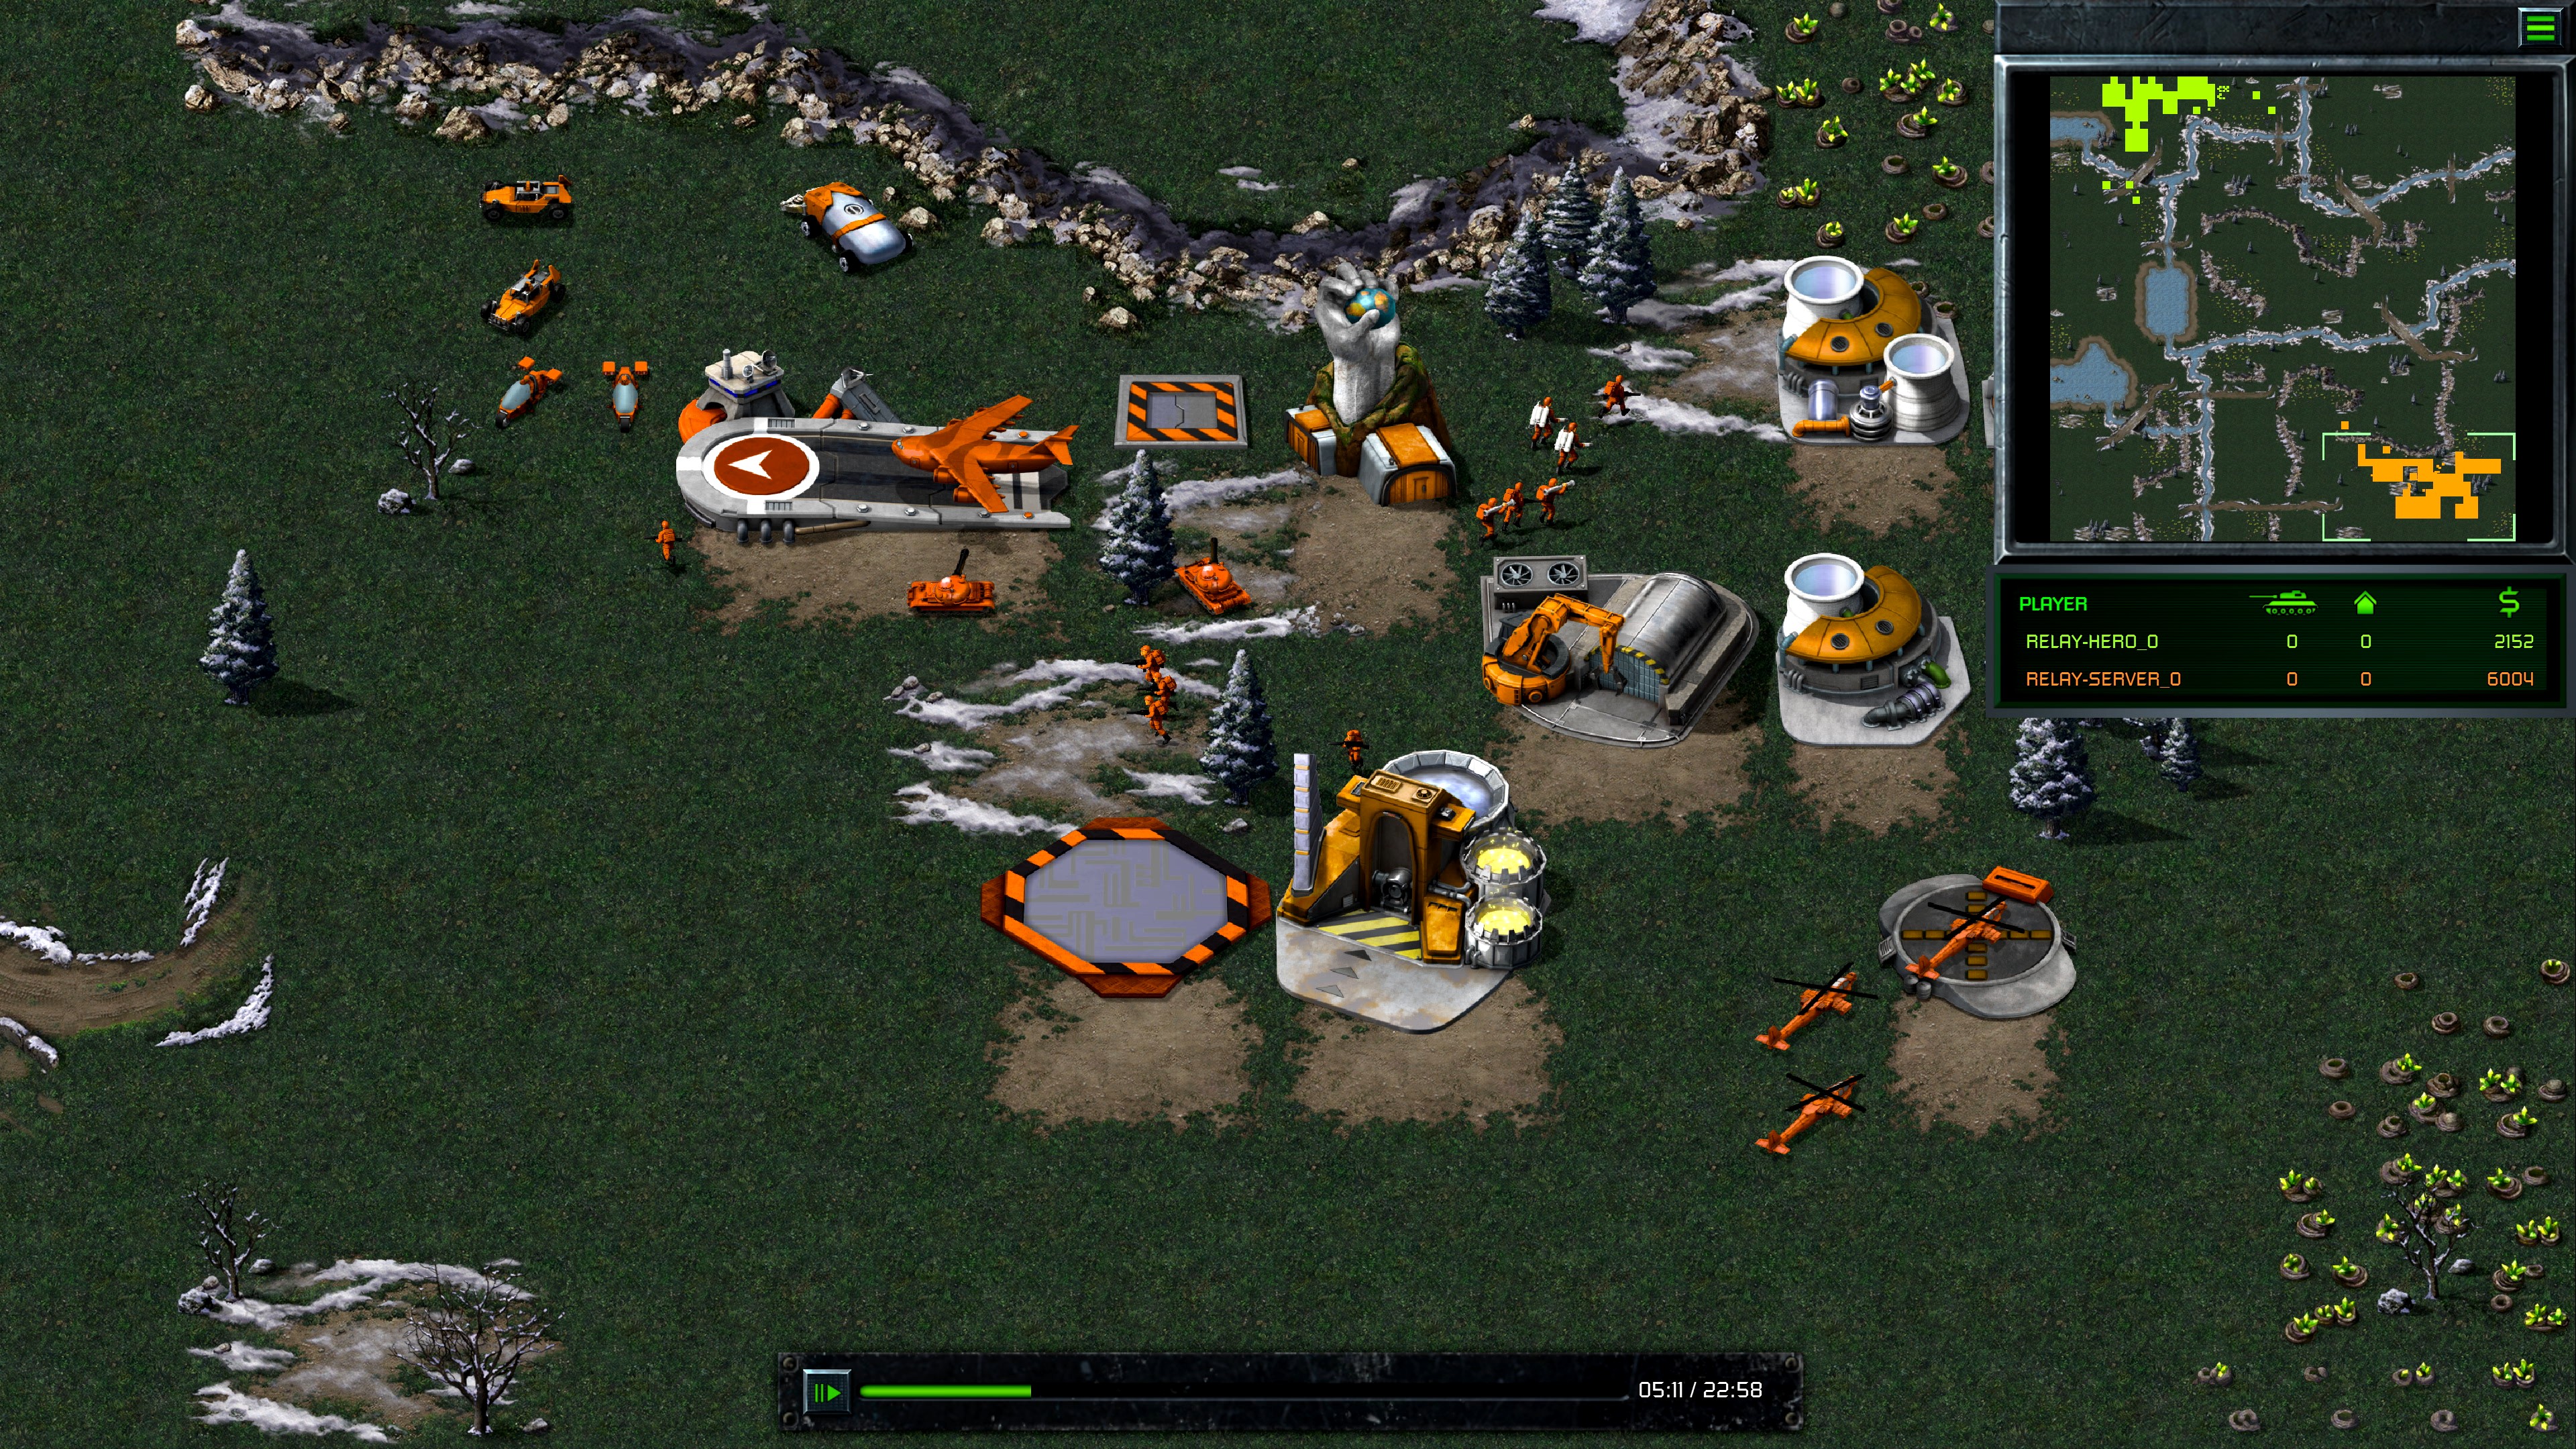 Command and conquer remastered. Command Conquer Remastered collection 2020. Command & Conquer Remastered collection. Command and Conquer 1995 Remaster. Command Conquer Red Alert 1 Remastered.